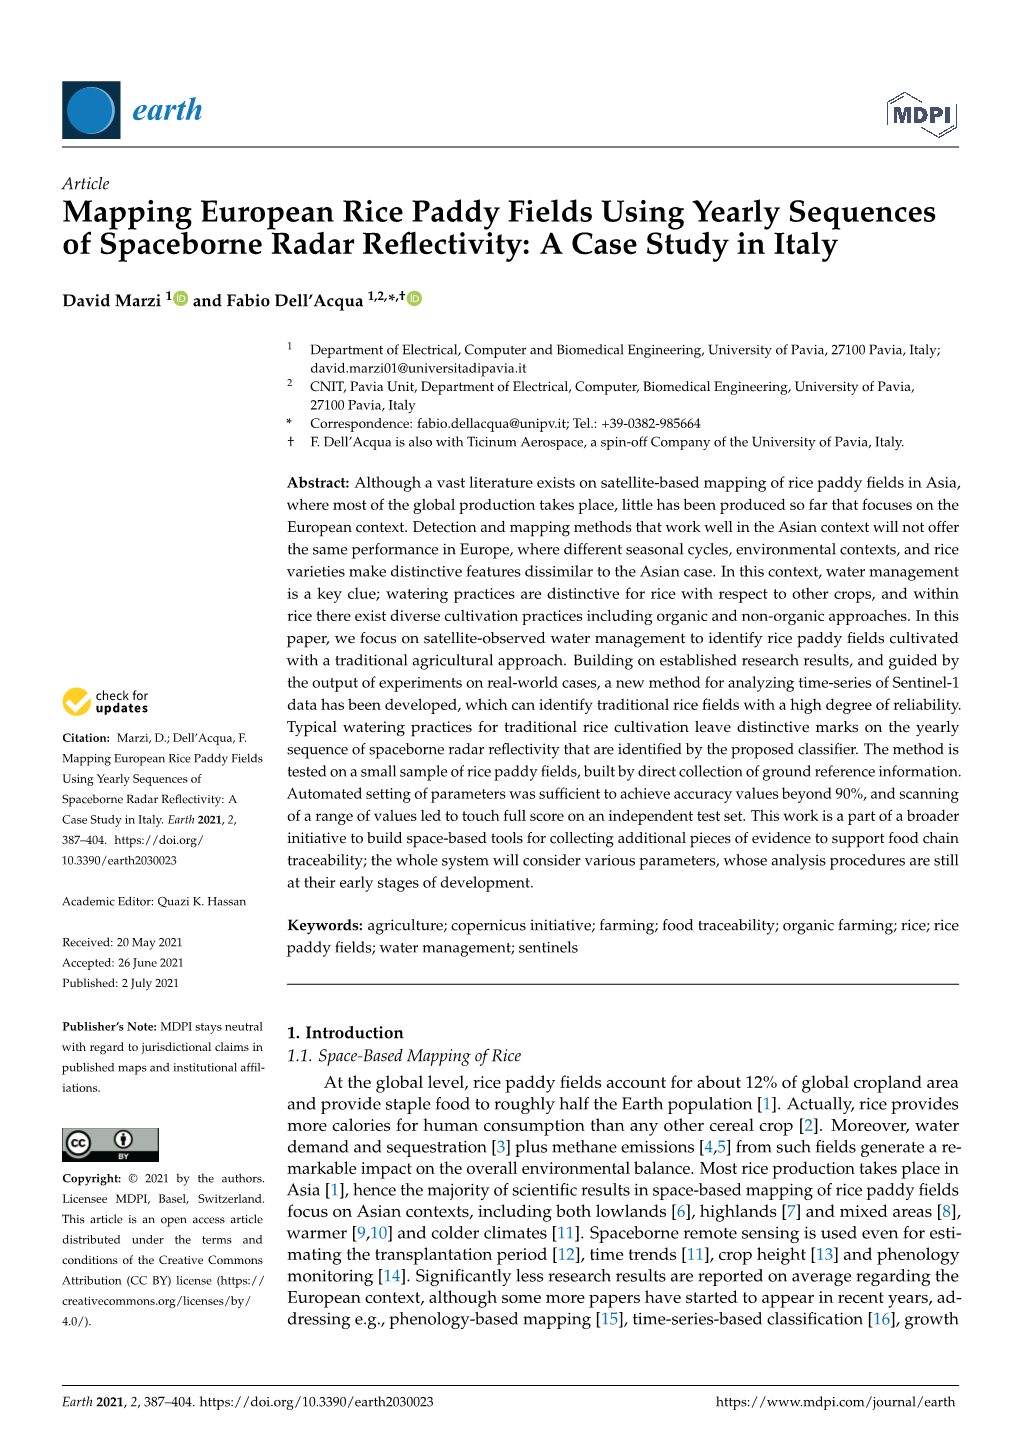 Mapping European Rice Paddy Fields Using Yearly Sequences of Spaceborne Radar Reﬂectivity: a Case Study in Italy